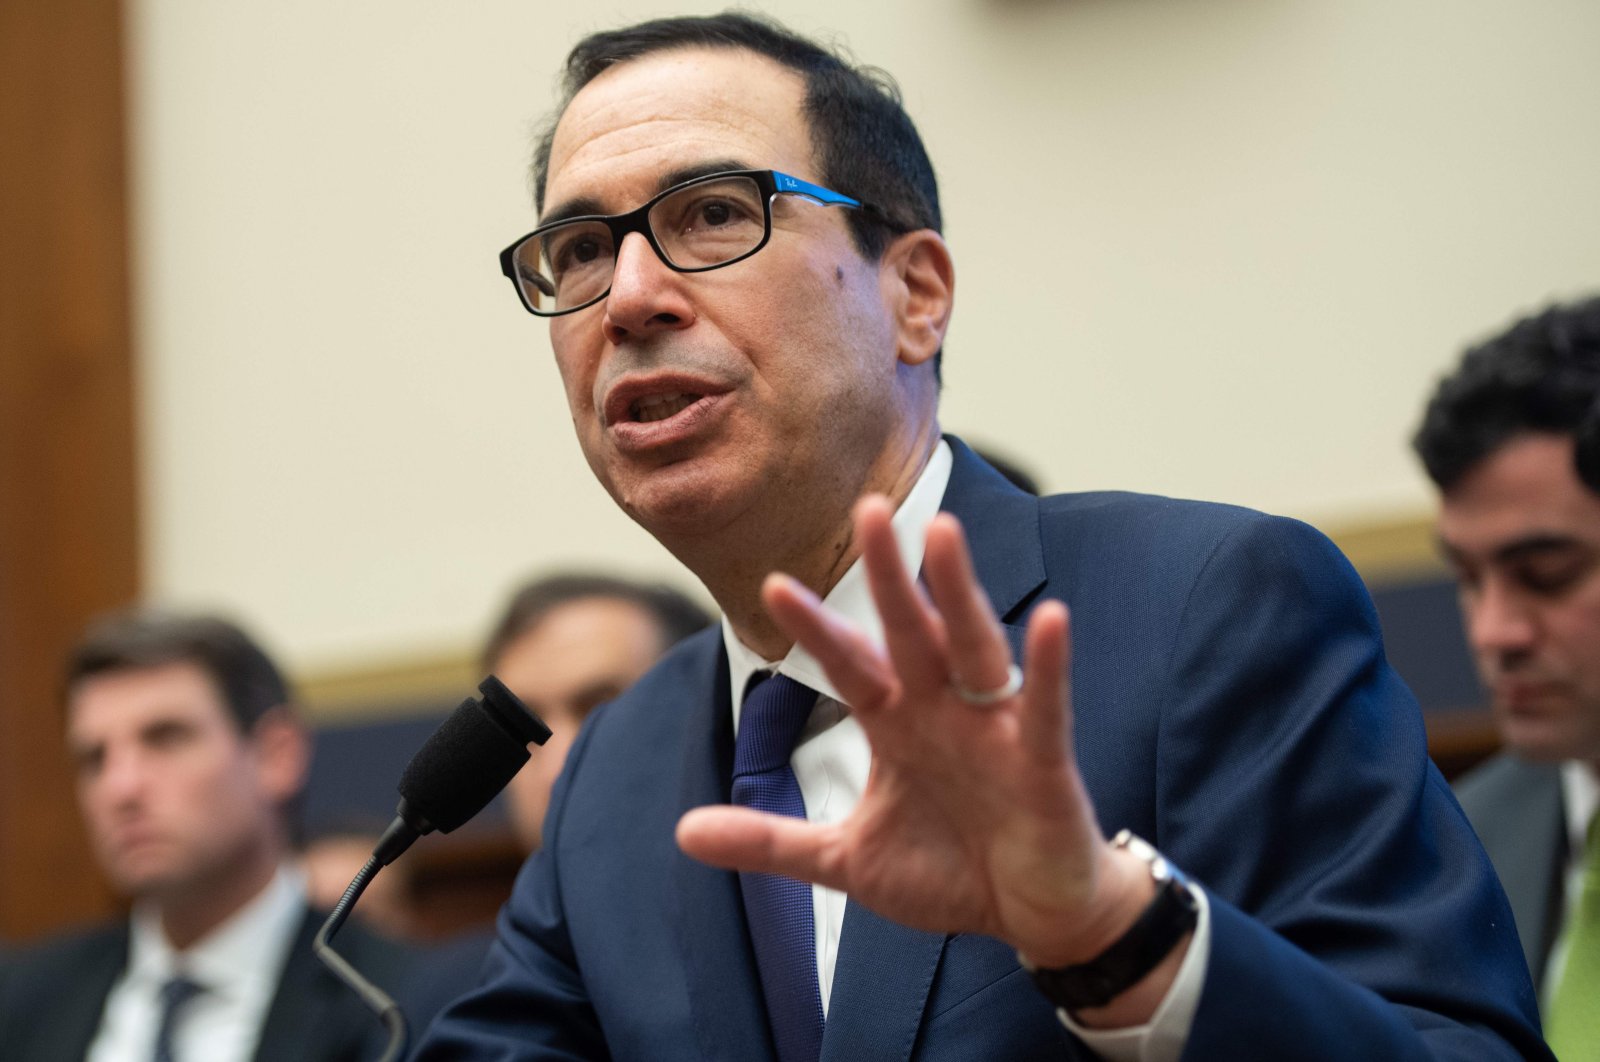 In this file photo taken on May 22, 2019 U.S. Secretary of Treasury Steven Mnuchin testifies during a House Committee on Financial Services hearing on Capitol Hill in Washington, DC. (AFP Photo)